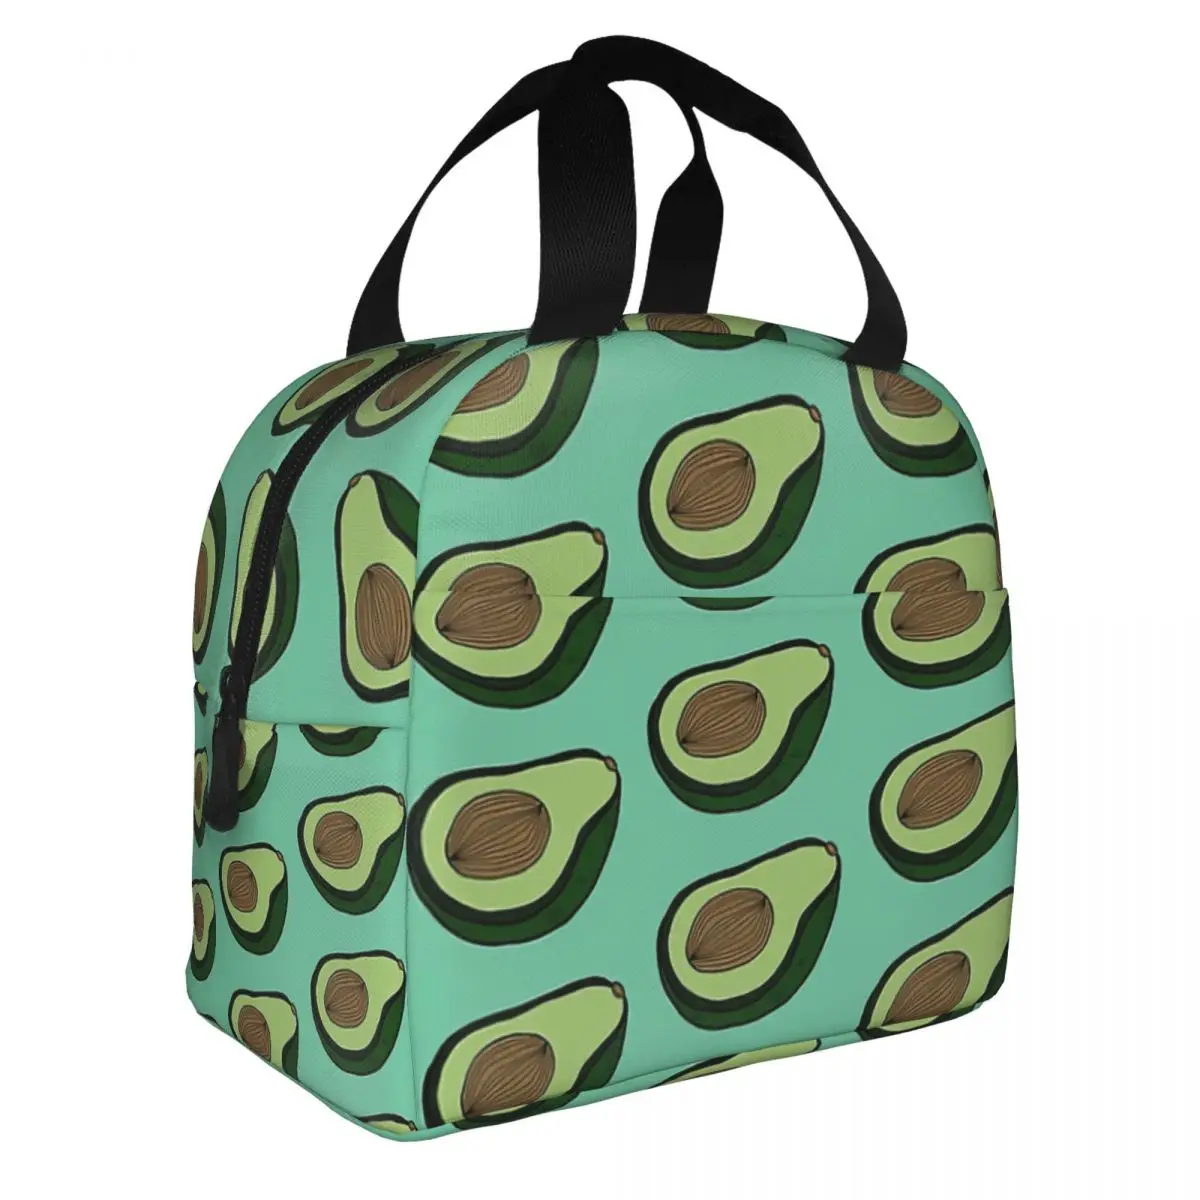 Avocado - SEAFOAM Lunch Bento Bags Portable Aluminum Foil thickened Thermal Insulation Oxford Cloth Lunch Bag for Women Men Boy